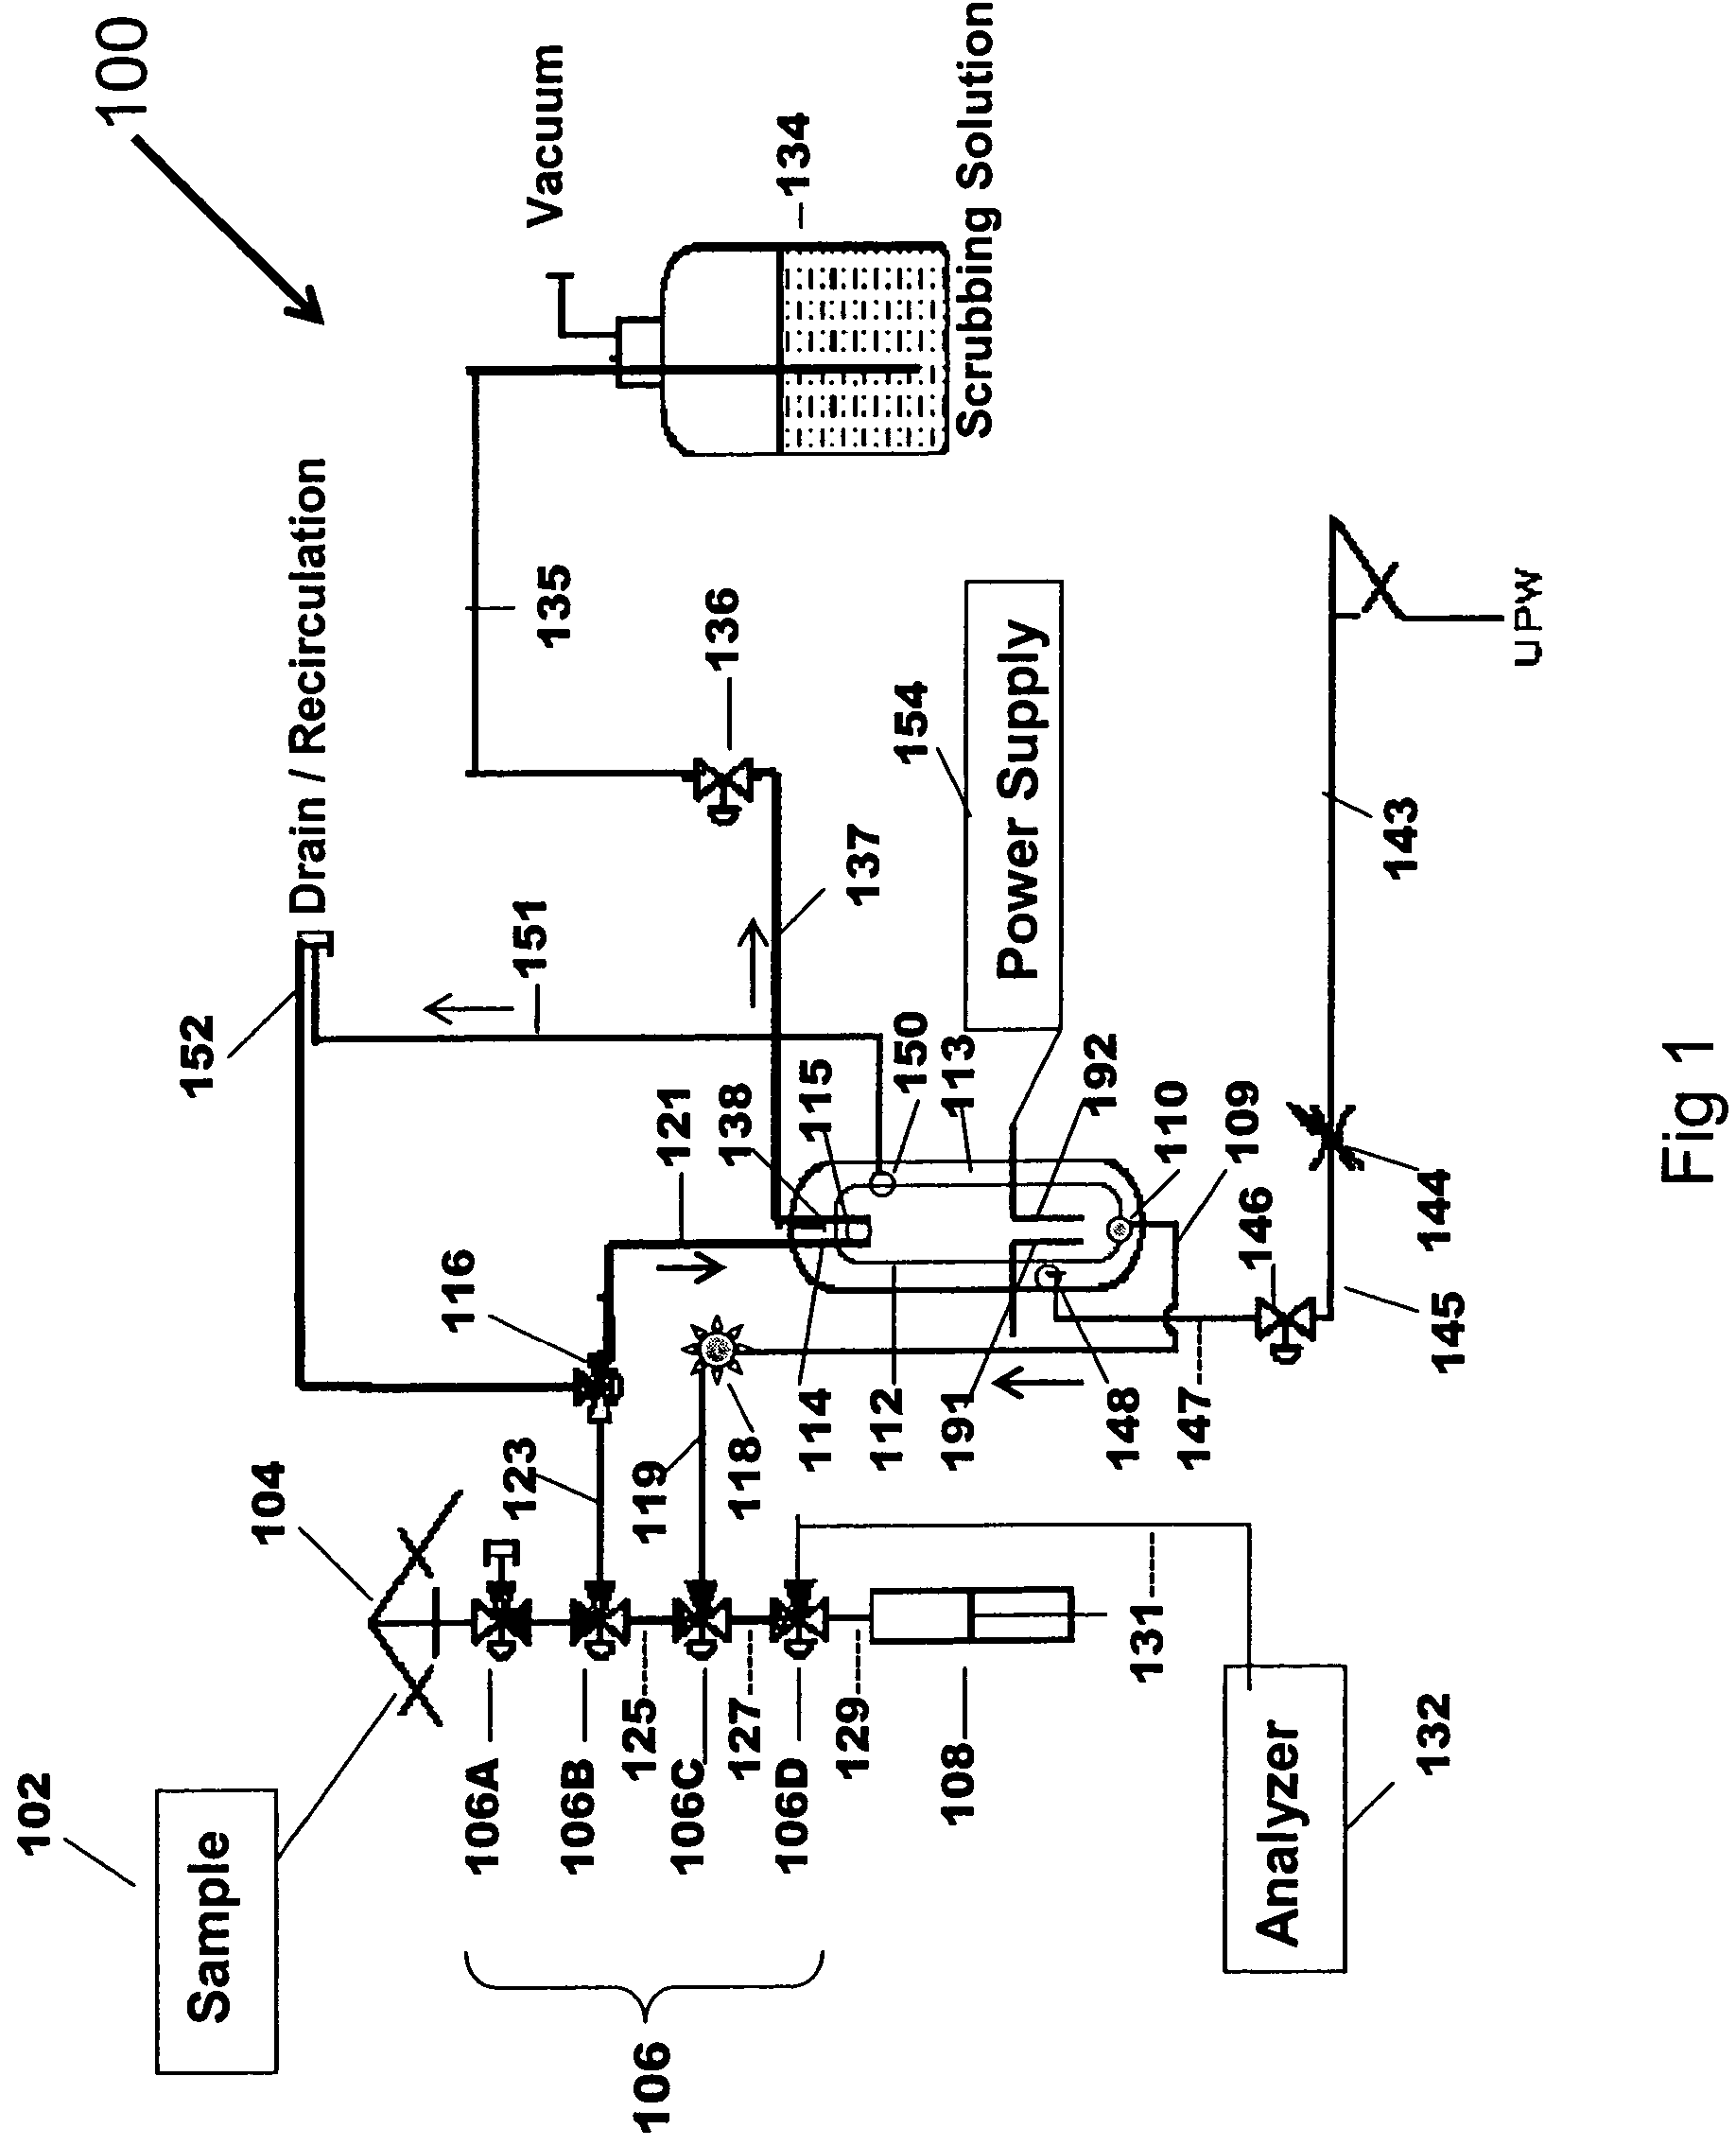 Electrolytic method and apparatus for trace metal analysis